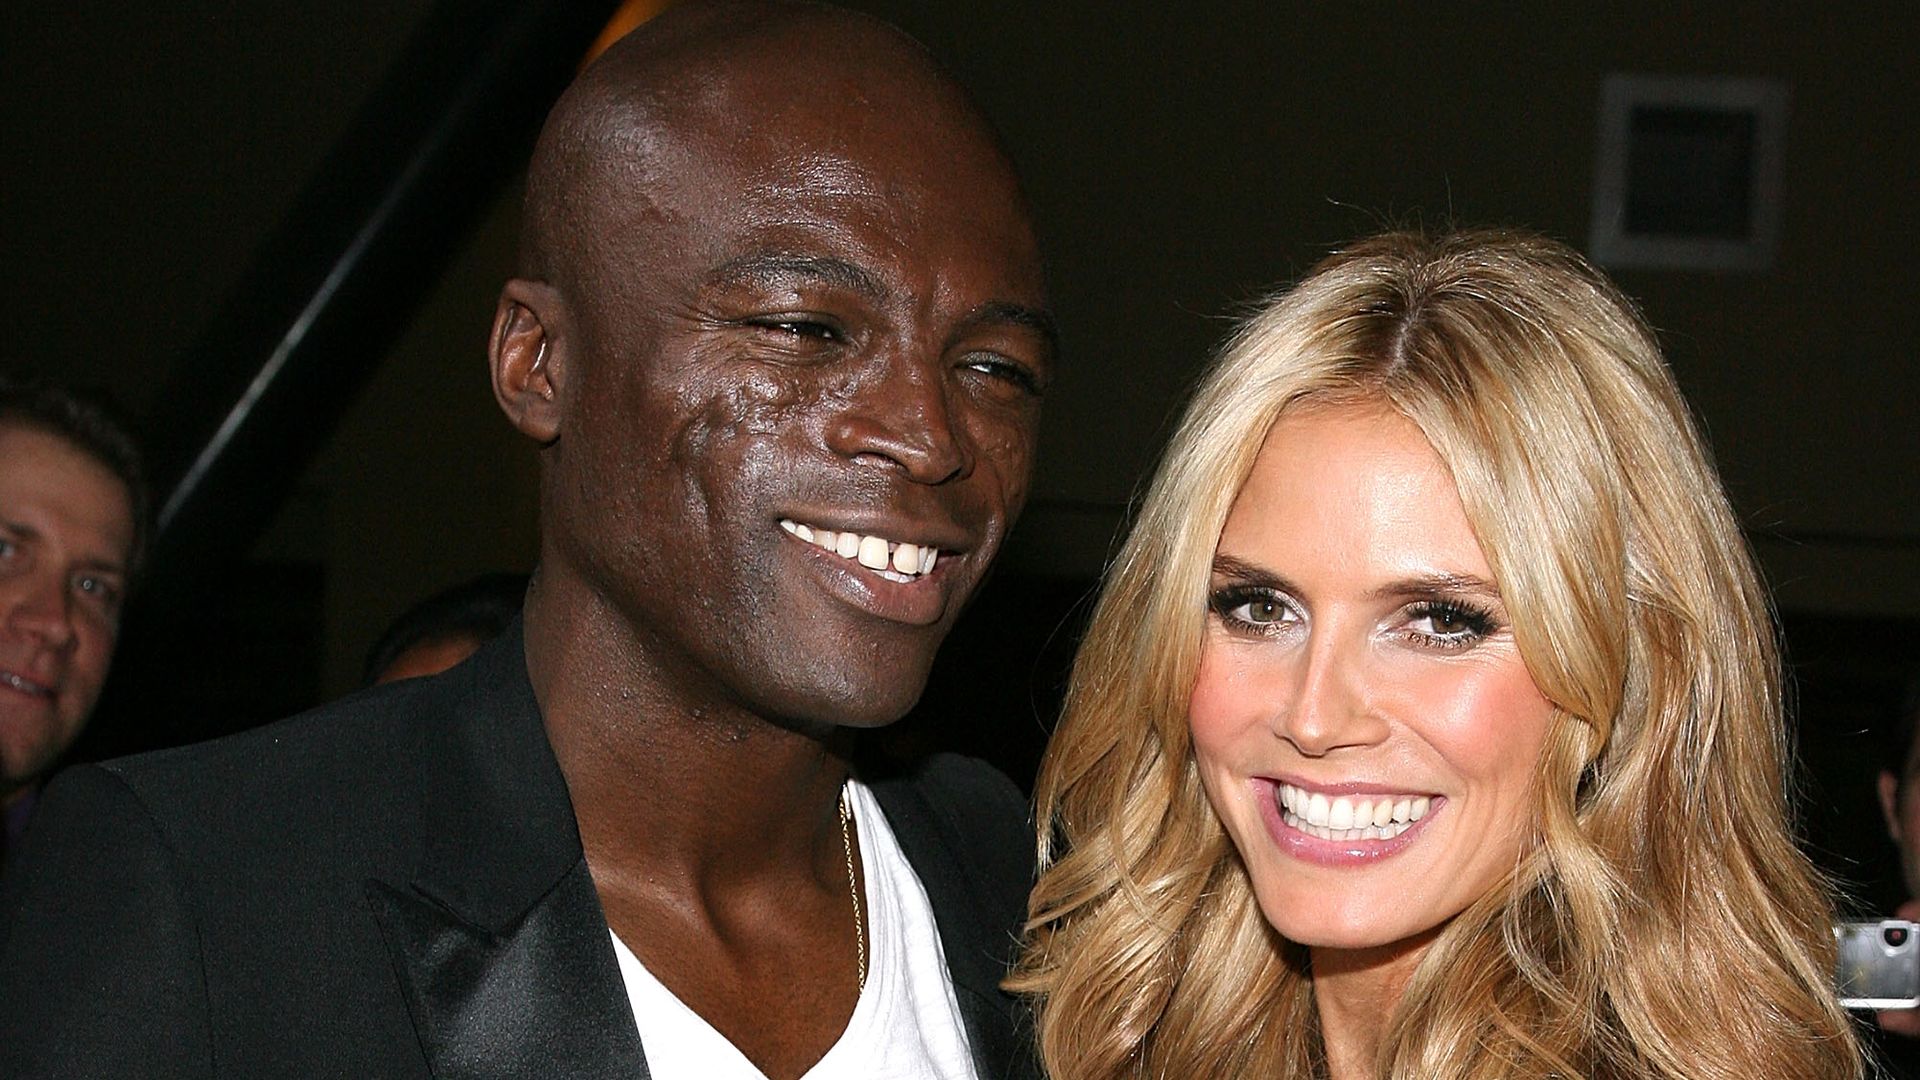 Heidi Klum  and husband musician Seal pose at Victoria's Secret Fashion Show after party held at the Kodak Theatre, Grand Ballroom on November 15, 2007 in Hollywood, California.